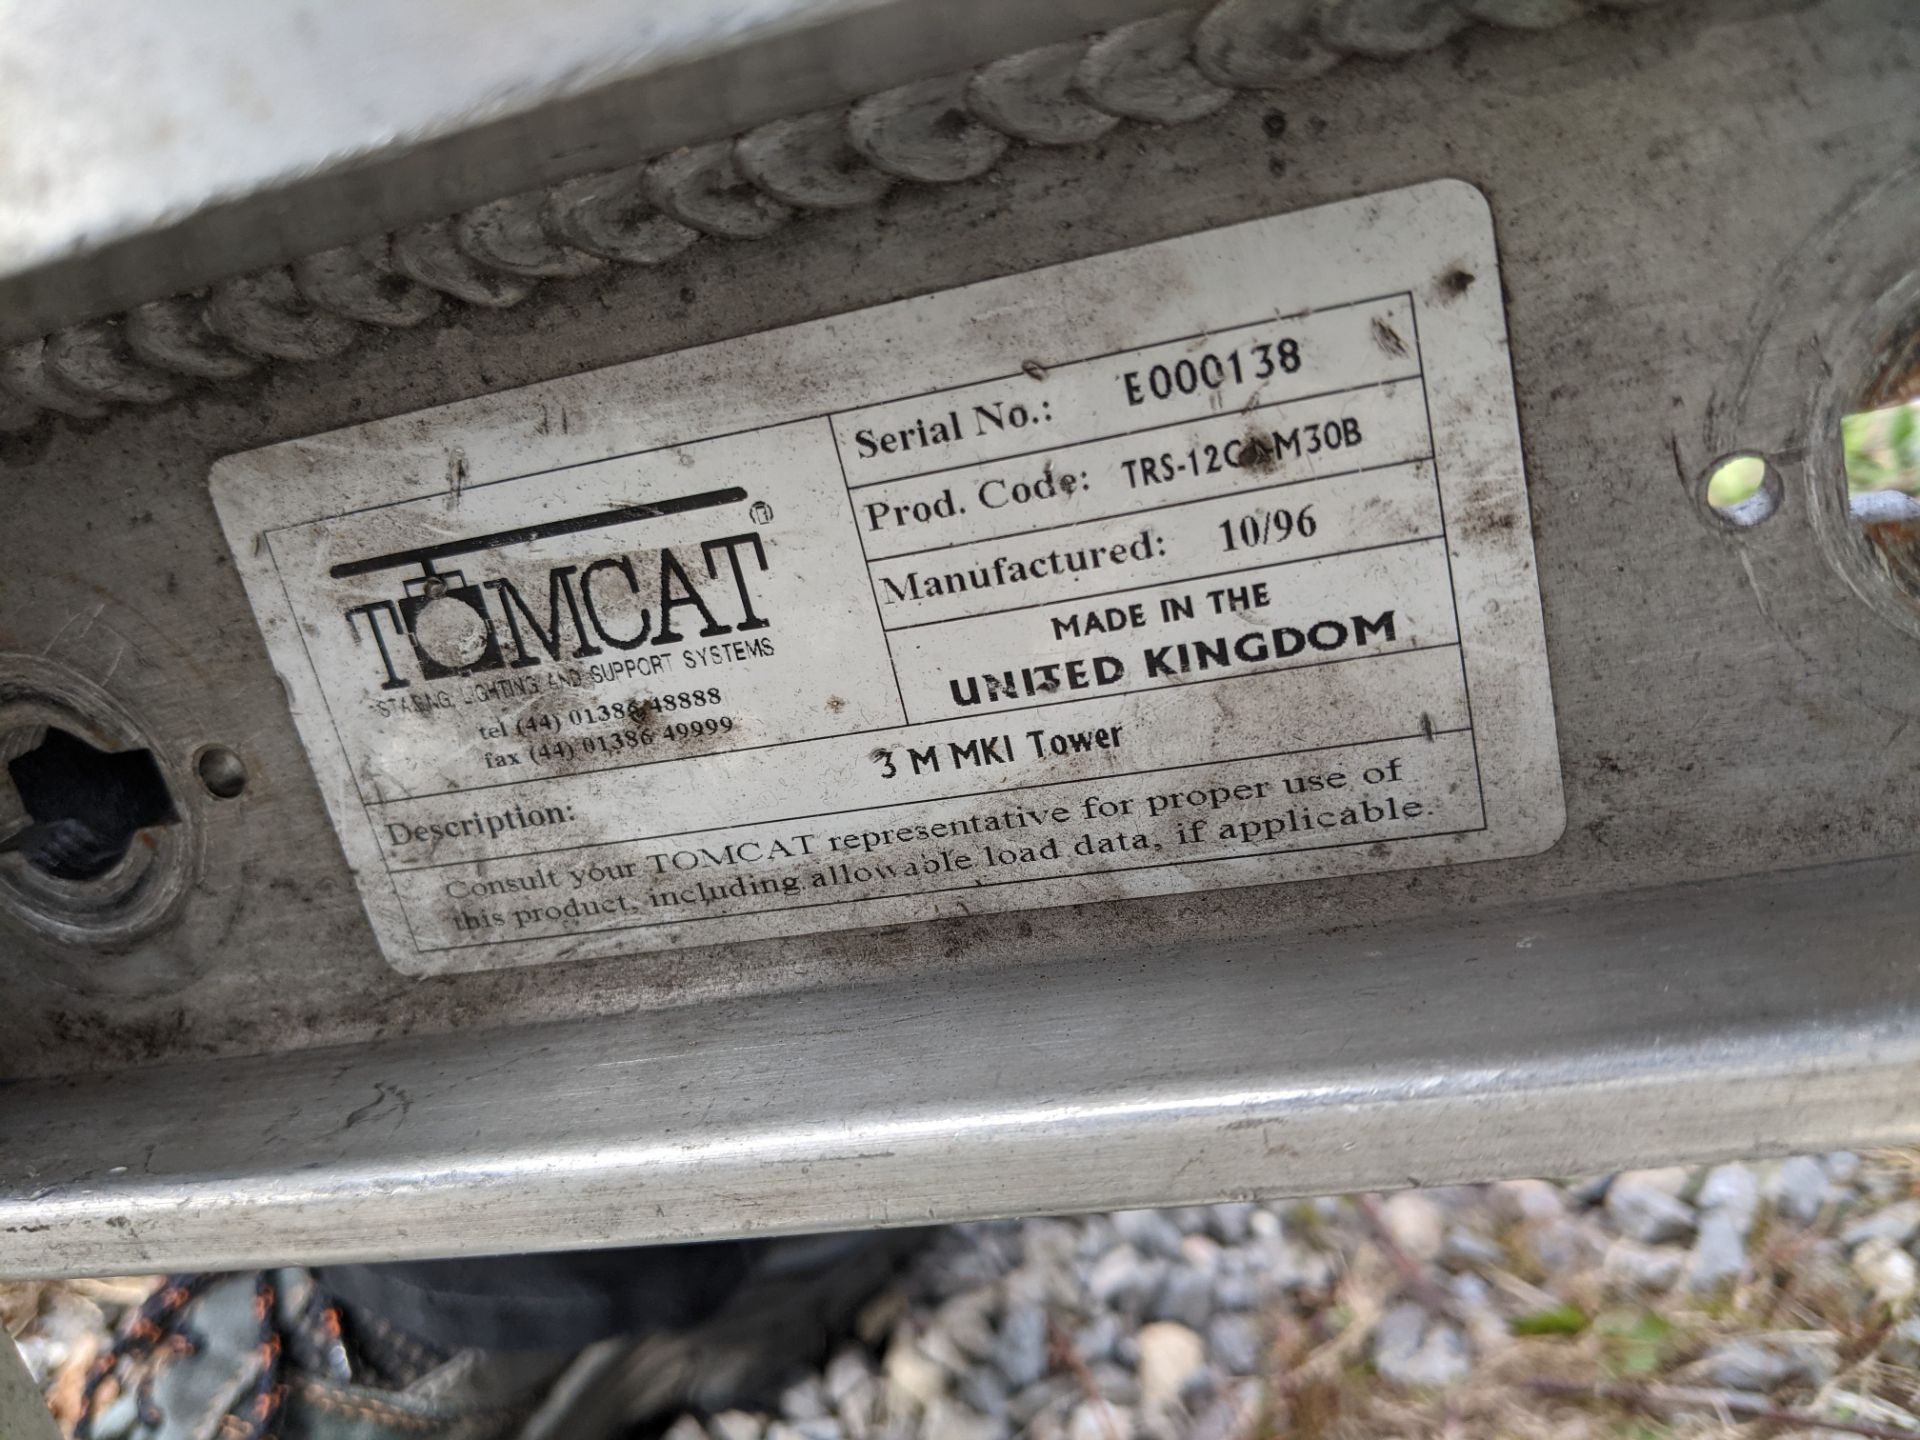 Tomcat 12inch 3m MK1 Tower. 123233. Ex-Hire, Fair Condition. TRS-12G1-M30B. Serial No: E000138 - - Image 2 of 3